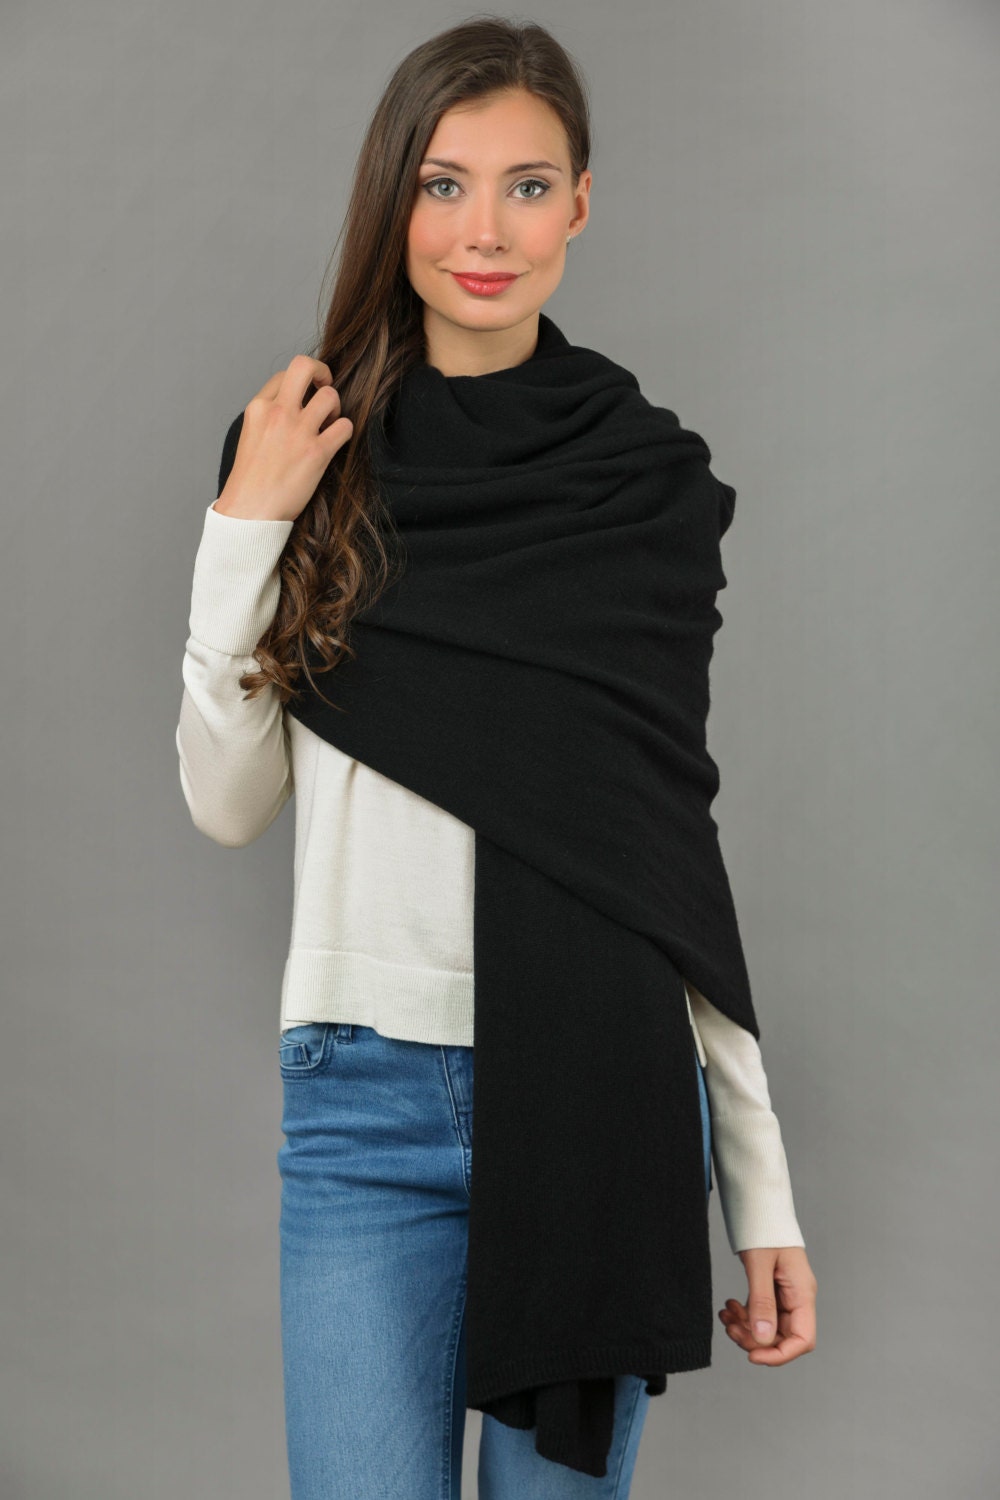 Cashmere Wrap Scarf Shawl Super Soft 2ply Knitted Oversize Luxury BLACK ...